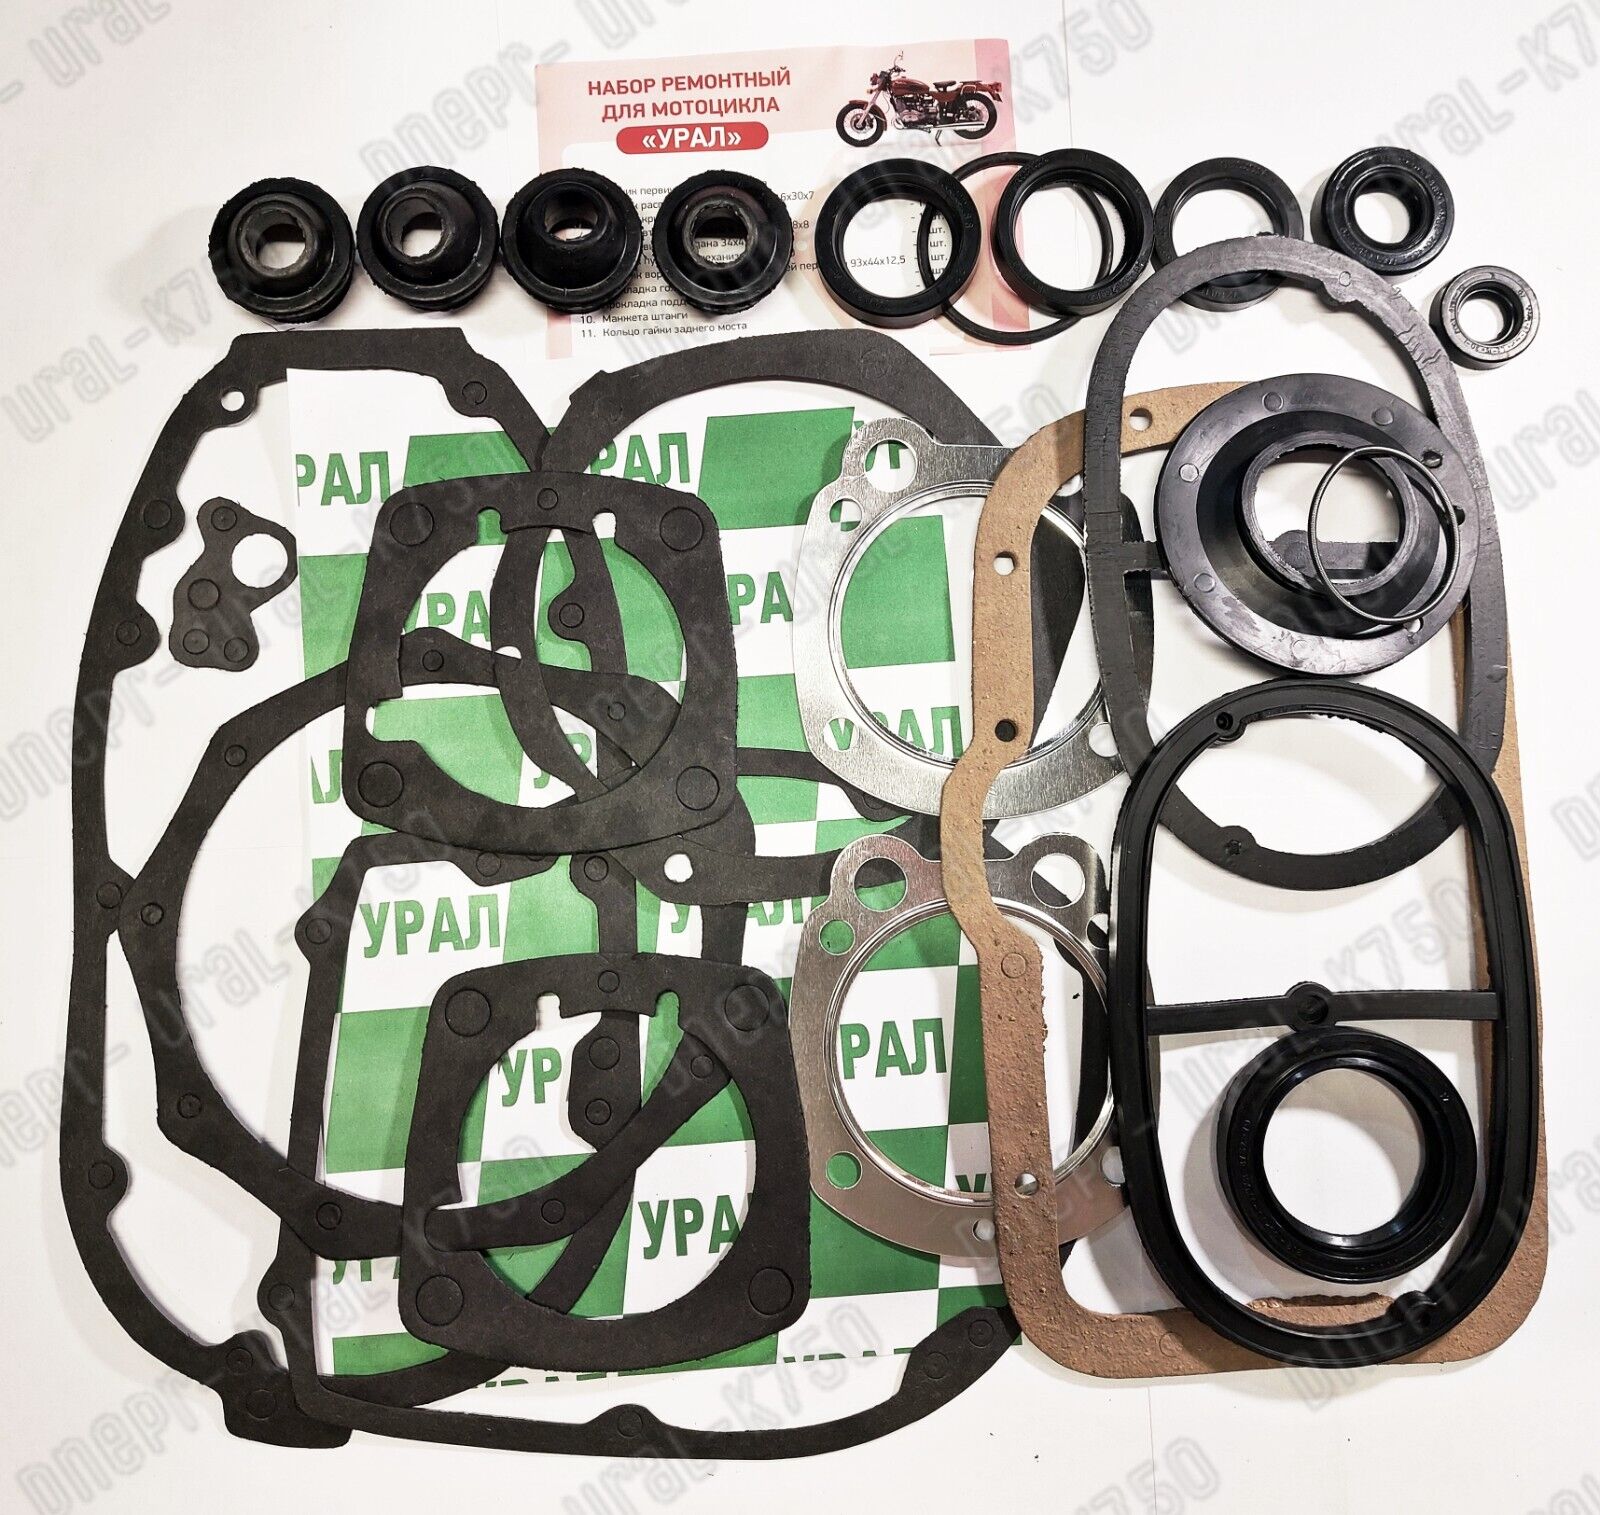 full set of gaskets and rubber products Ural 650 cc